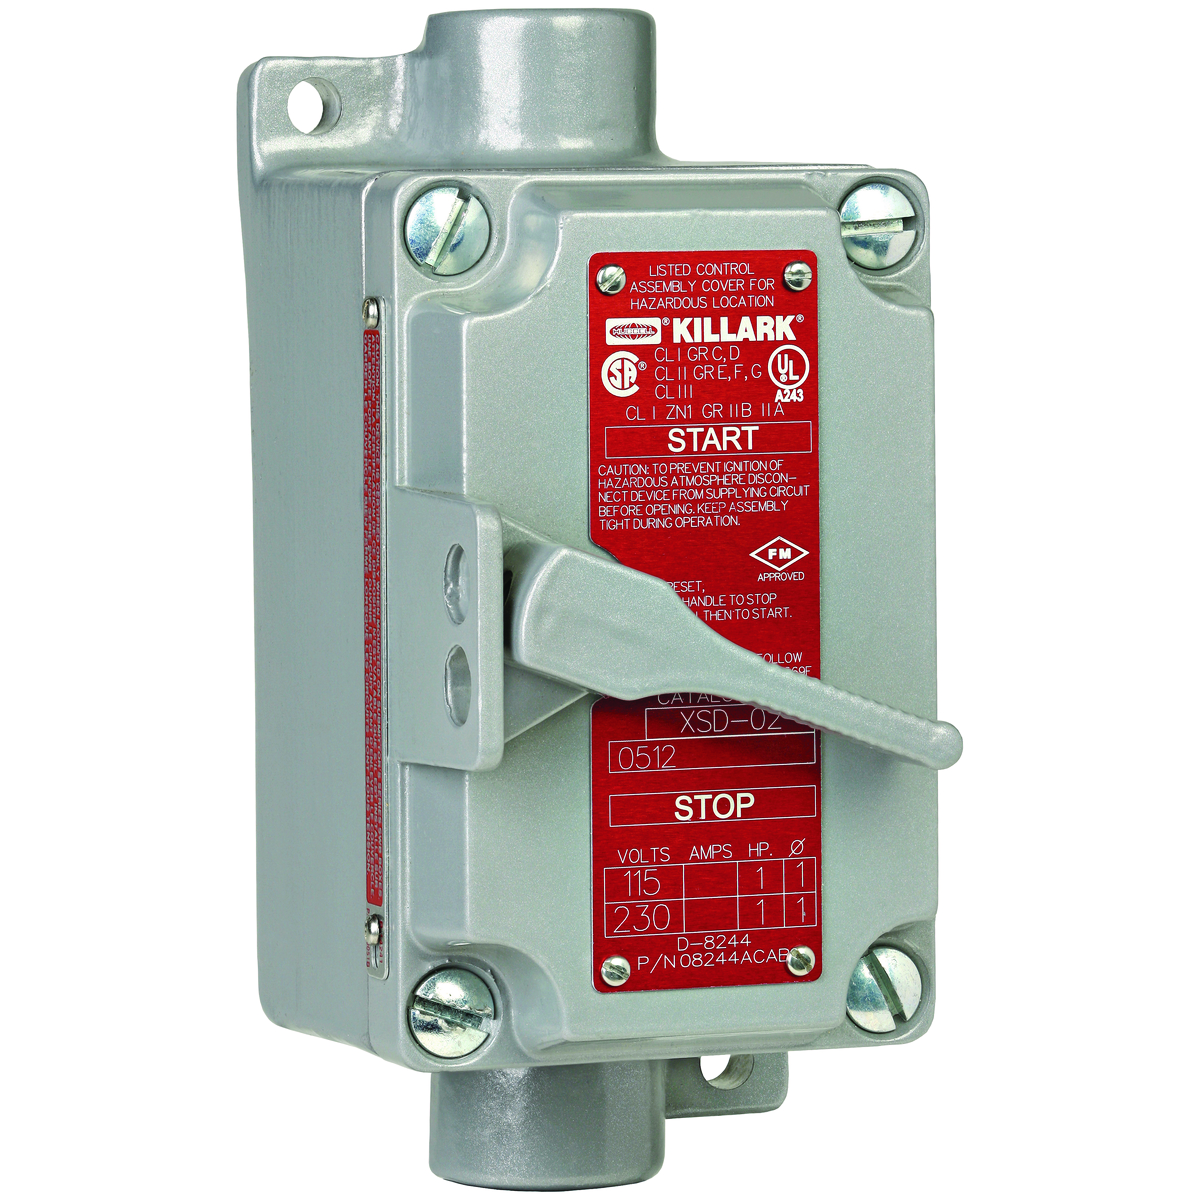 XSD/XSX/FXSD/FXSX SERIES - XSD SINGLE GANG ALUMINUM MANUAL MOTORSTARTING SWITCH - 1 POLE SINGLE PHASE - COVER AND SWITCH ASSEMBLY